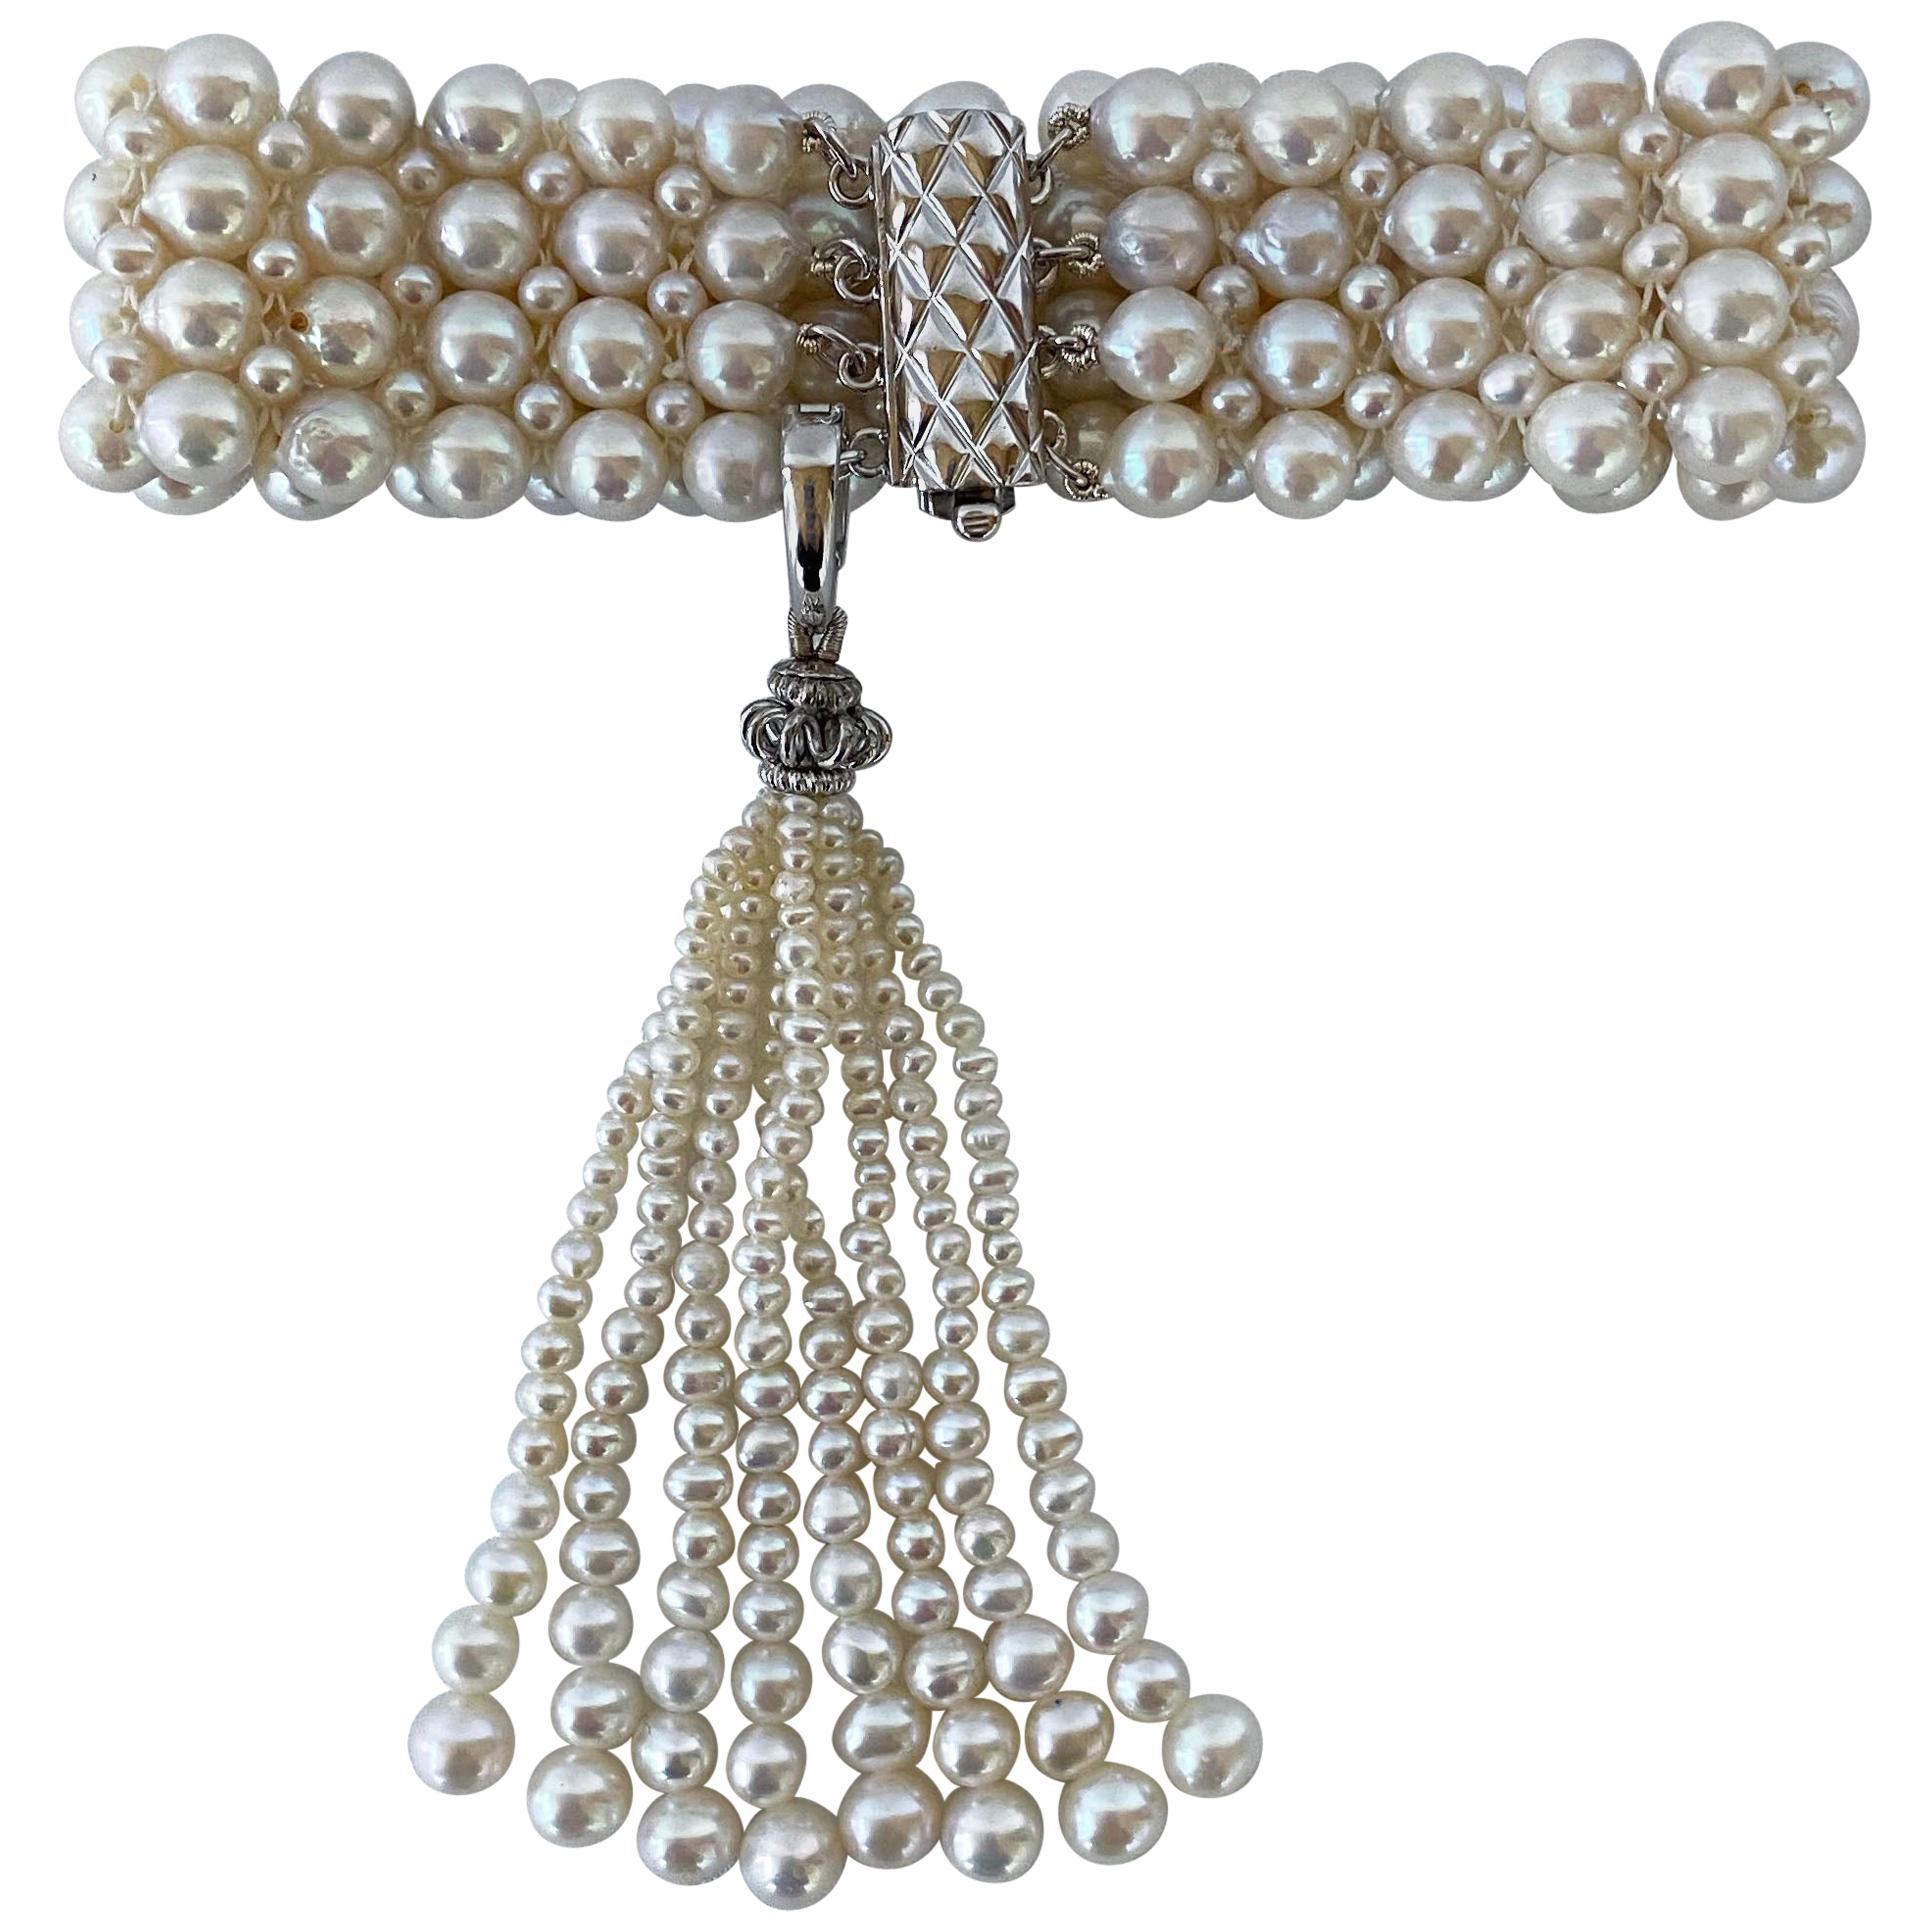 Marina J. "Art Deco" Inspired Woven Pearl Bracelet with Pearl Tassel For Sale